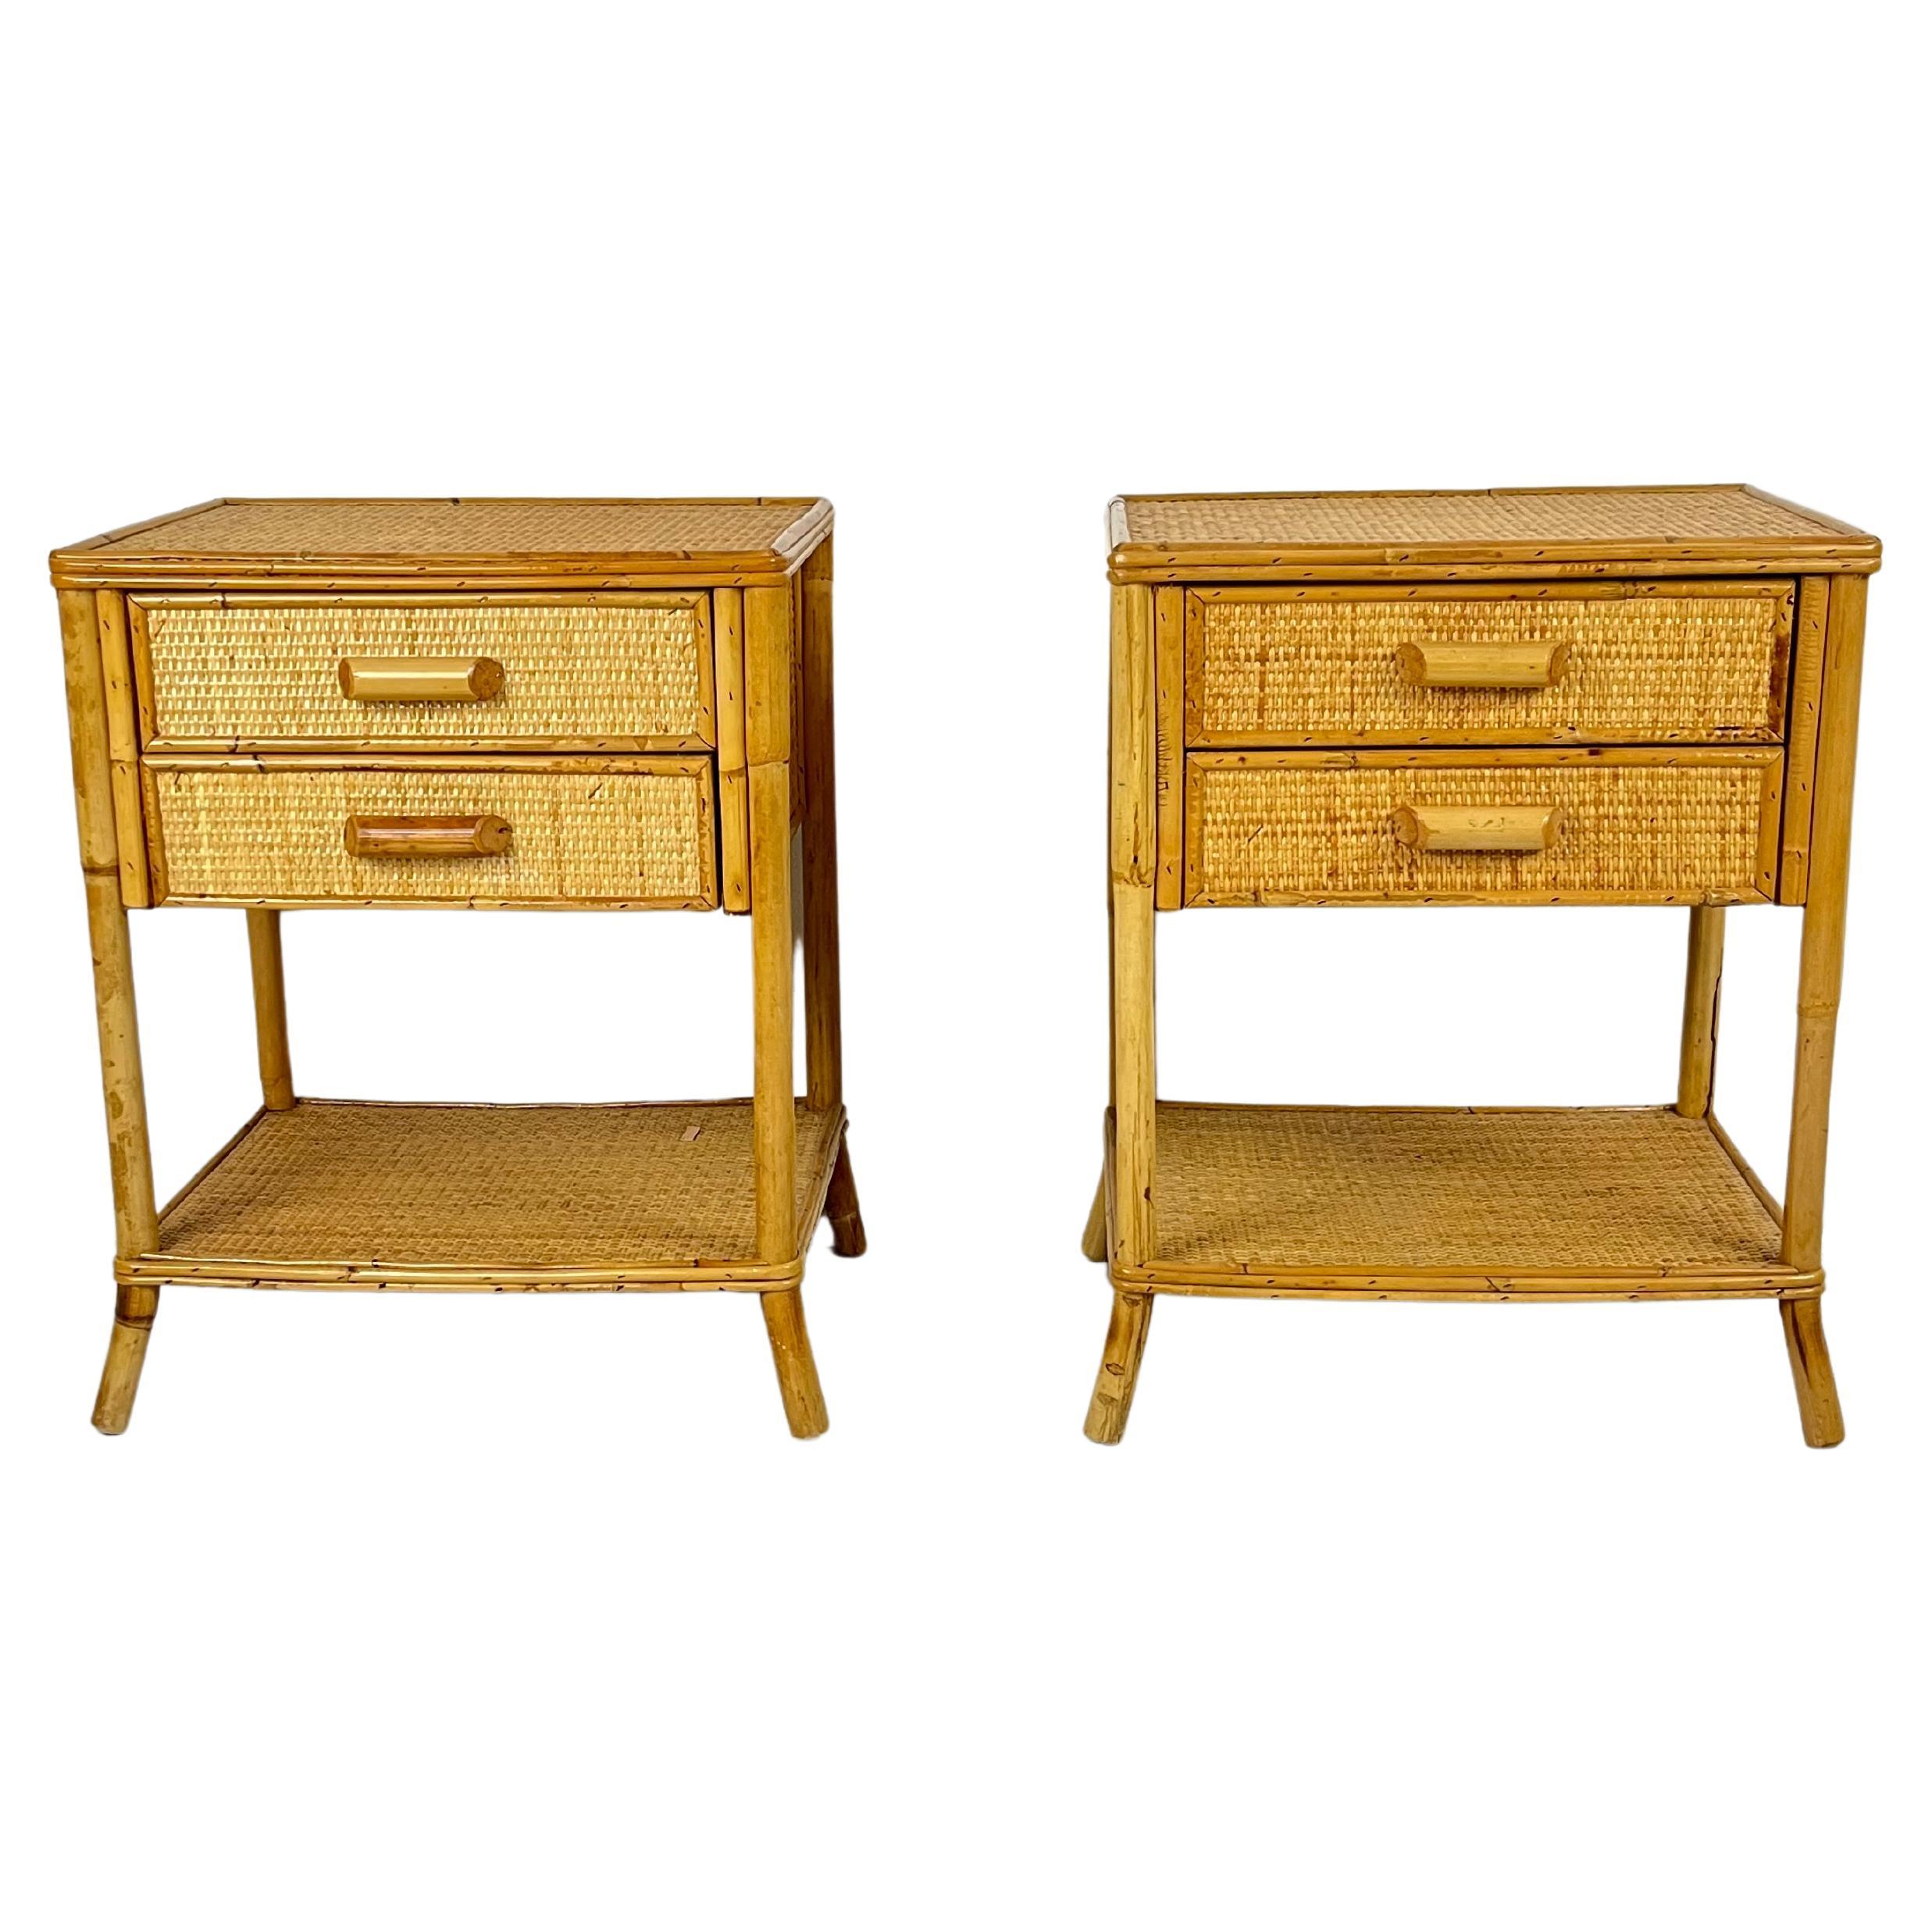 Pair of Vintage Italian Bamboo and Rattan Bedside Tables 1970s